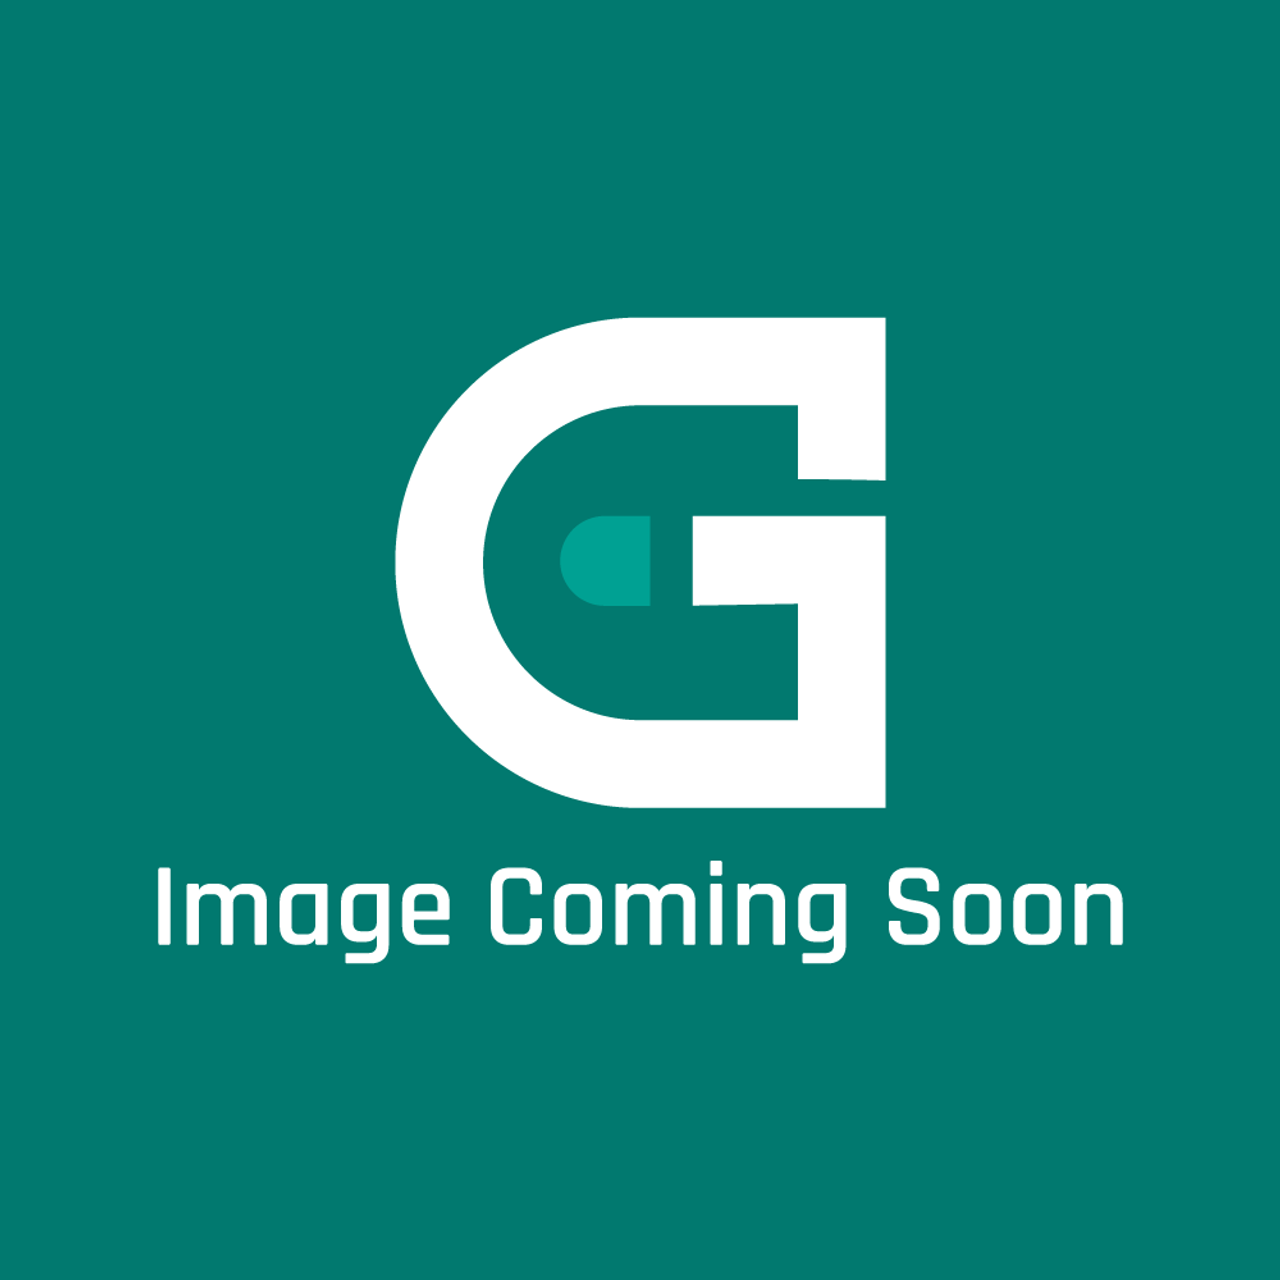 GE Appliances WB31T10148 - Grate Ctr 30 (Prf) - Image Coming Soon!